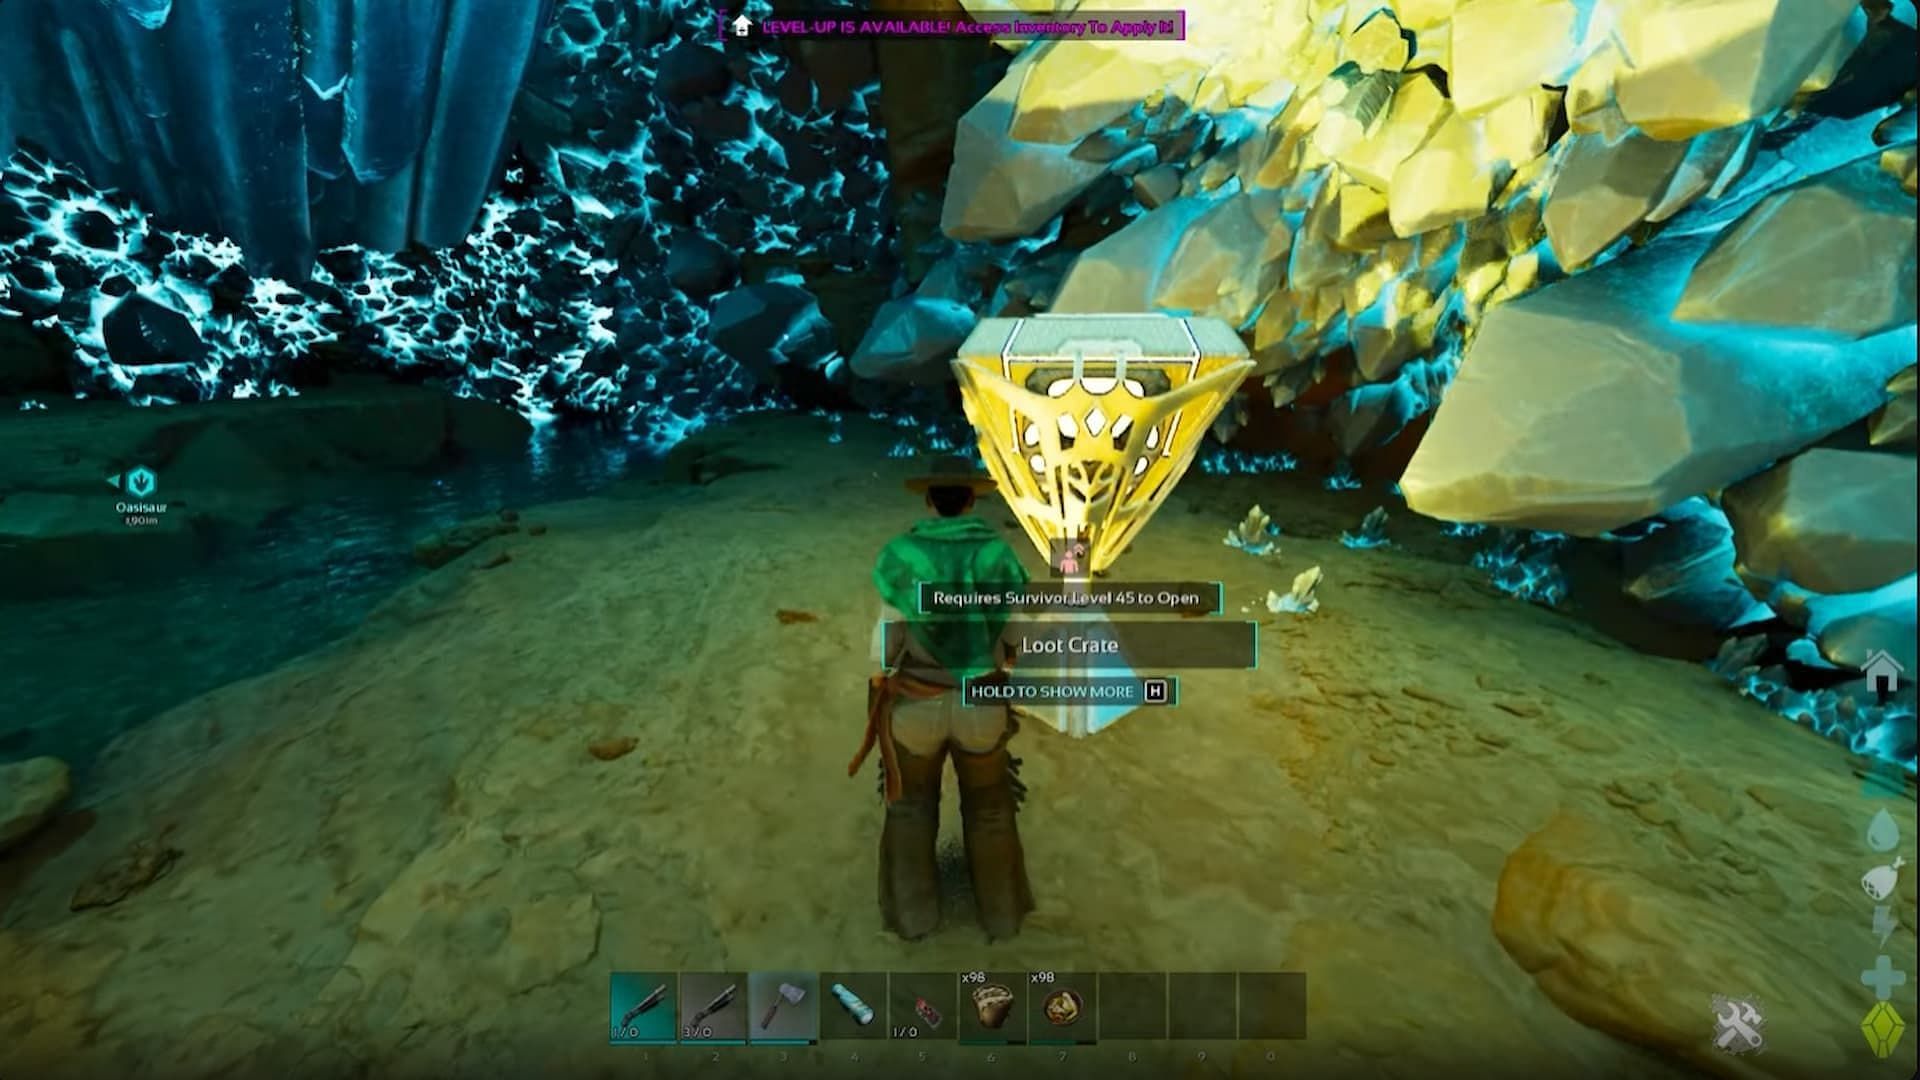 Loot Crates can spawn inside the Oasis Cave in Ark Survival Ascended (Image via Studio Wildcard and Teacher Game Too/YouTube)